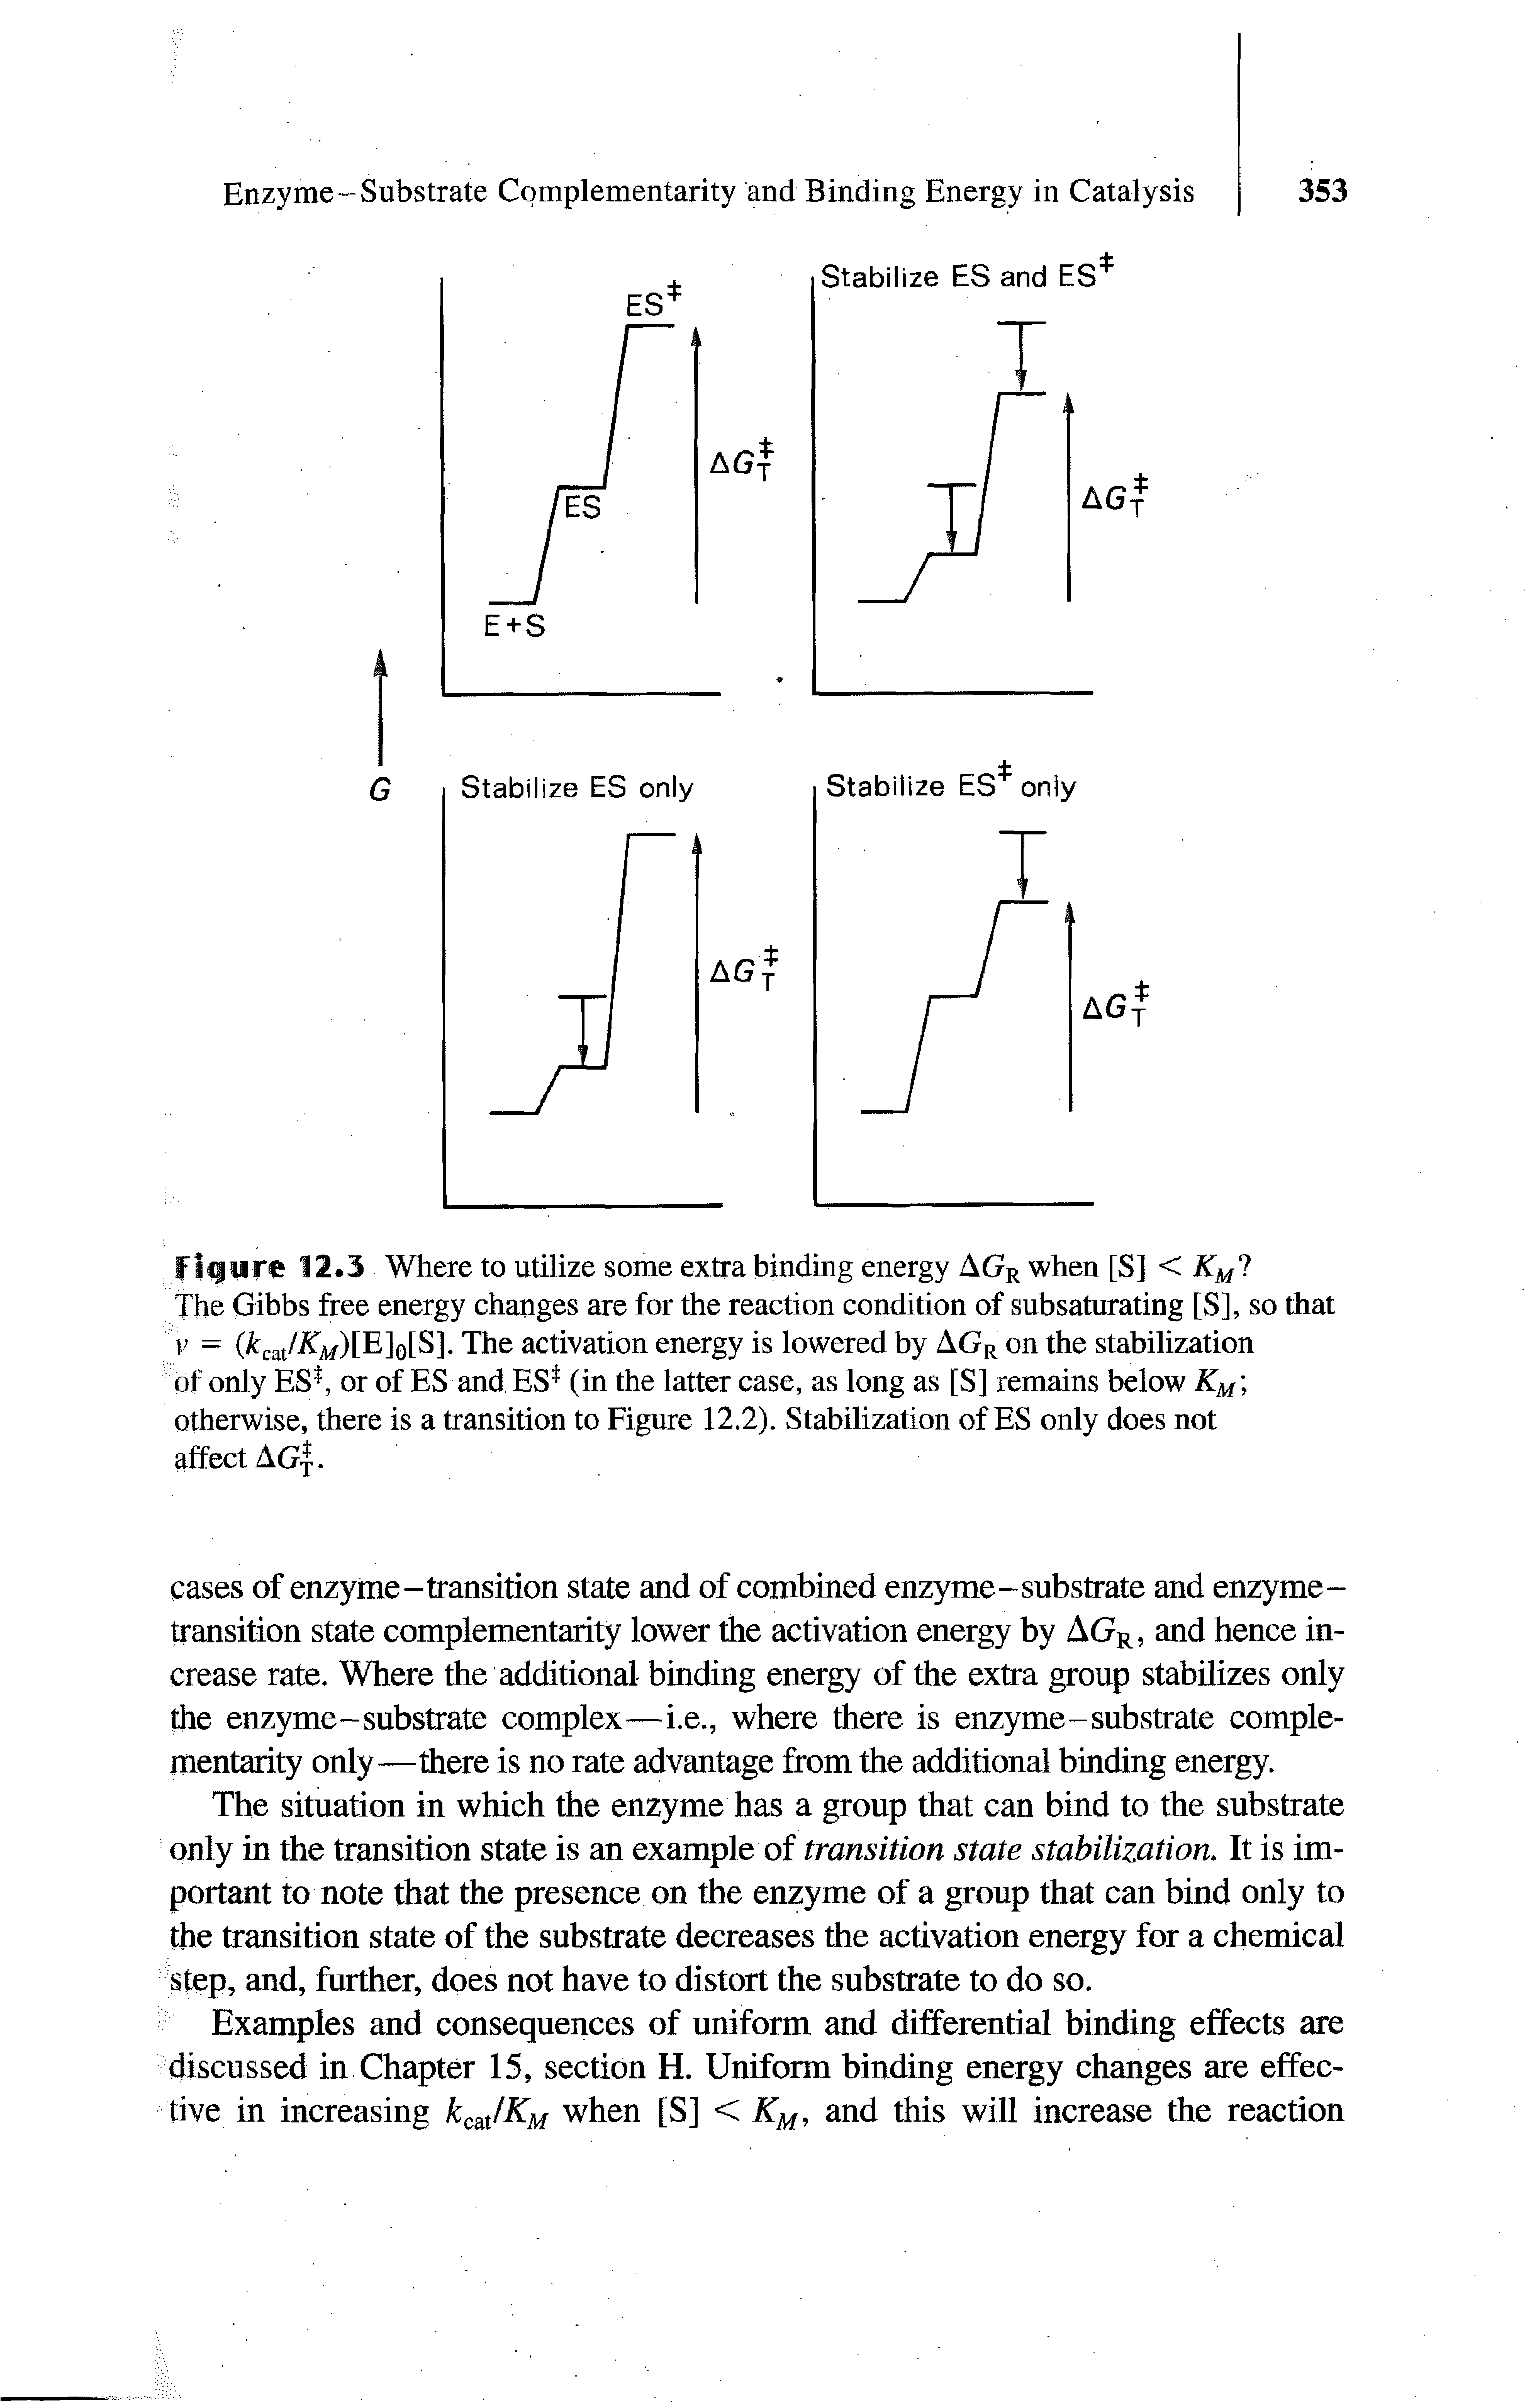 Figure 12.3 Where to utilize some extra binding energy AGR when [S] < KM1 The Gibbs free energy changes are for the reaction condition of subsaturating [S], so that v = (fccat/ATM)[E]0[S3. The activation energy is lowered by AGR on the stabilization of only ES1, or of ES and ES (in the latter case, as long as [S] remains below KM otherwise, there is a transition to Figure 12.2). Stabilization of ES only does not affect A Gy.